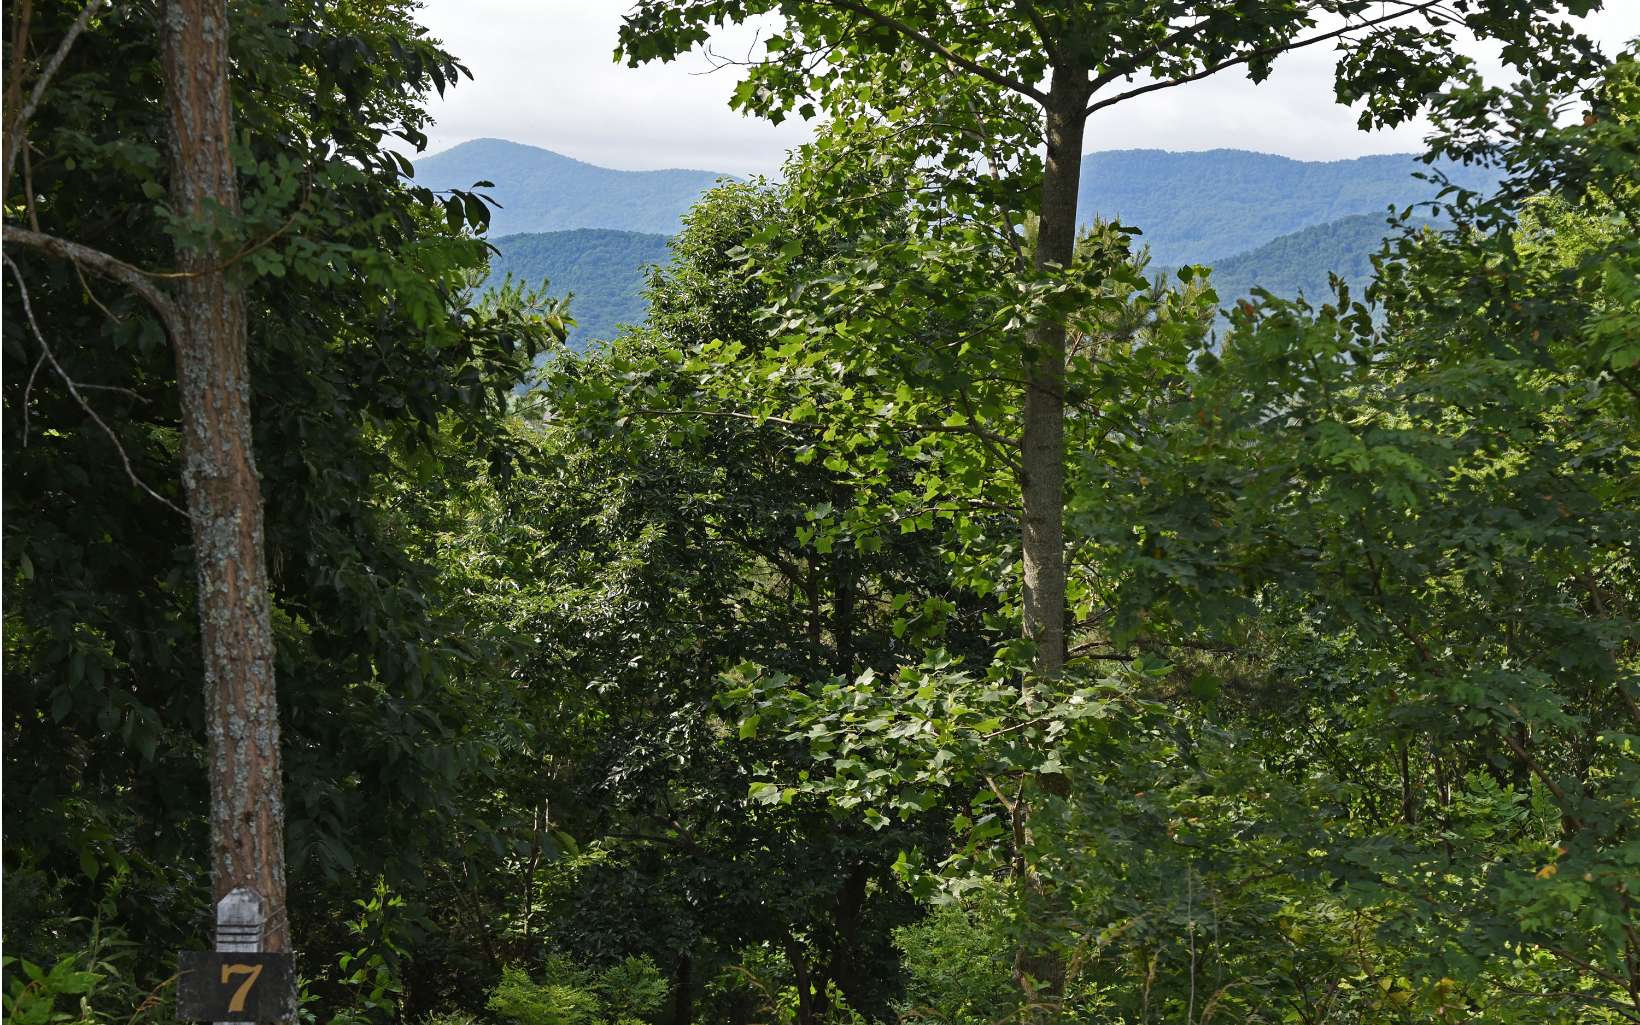 Lot with extraordinary views and paved roads, convenient to Blairsville, Lake Nottely and Blue Ridge. Upscale neighborhood with restrictions to protect your values and minimal annual fees. This lot would be ideal for a home with a basement. Views also across the street so almost 360 degree views to enjoy. Neighborhood has little traffic so nice to go for a walk in. Come view this lot and start your plans to build today. Septic and Well required.